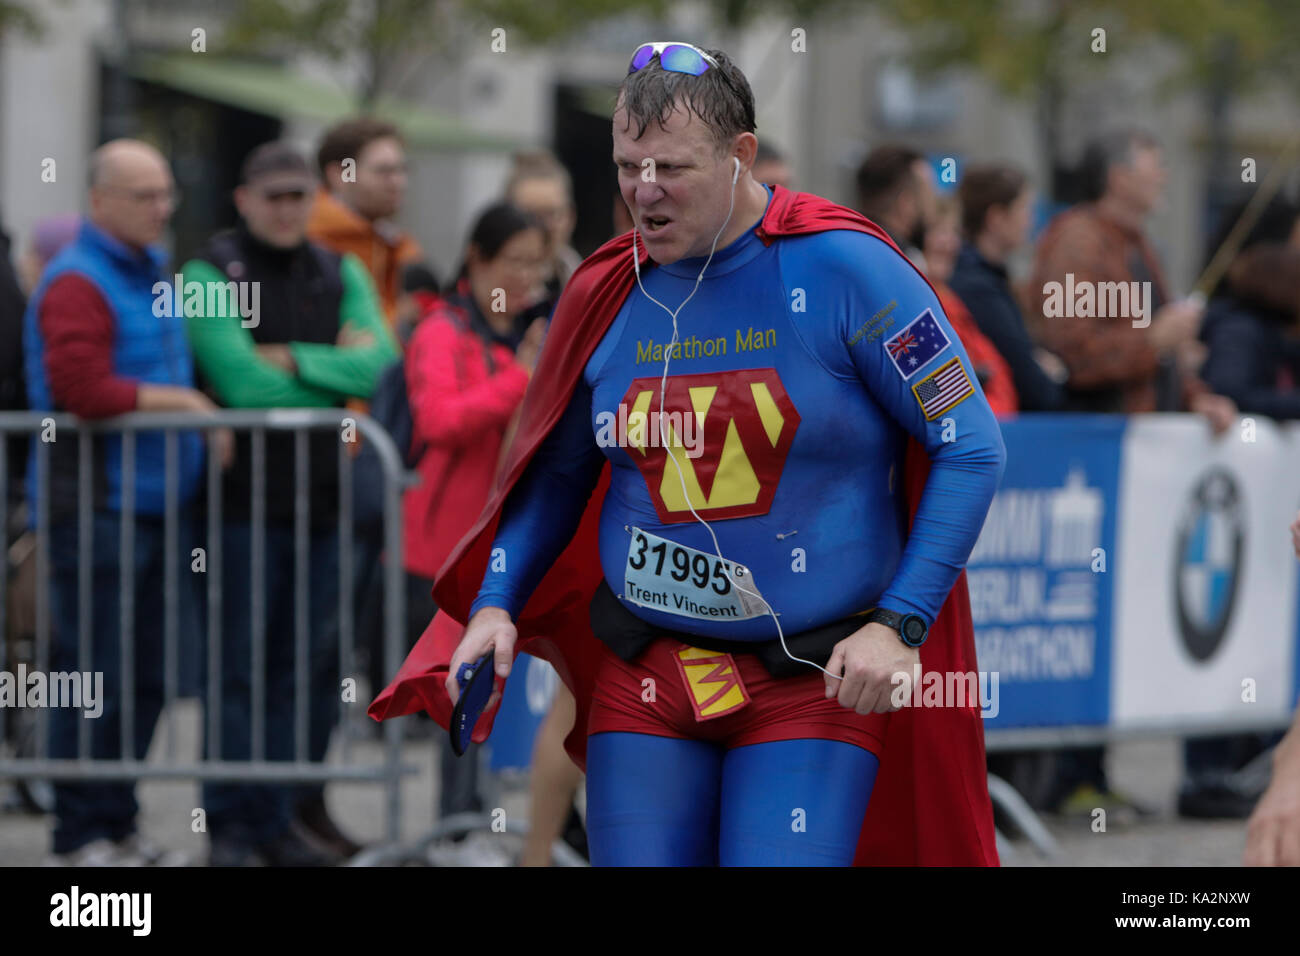 Berlin, Germany. 24th September 2017. A runner is dressed as Marathon Man super hero. More than 43,000 runners from 137 nations took to the streets of Berlin to participate in the 44th BMW Berlin Marathon. Credit: Michael Debets/Alamy Live News Stock Photo